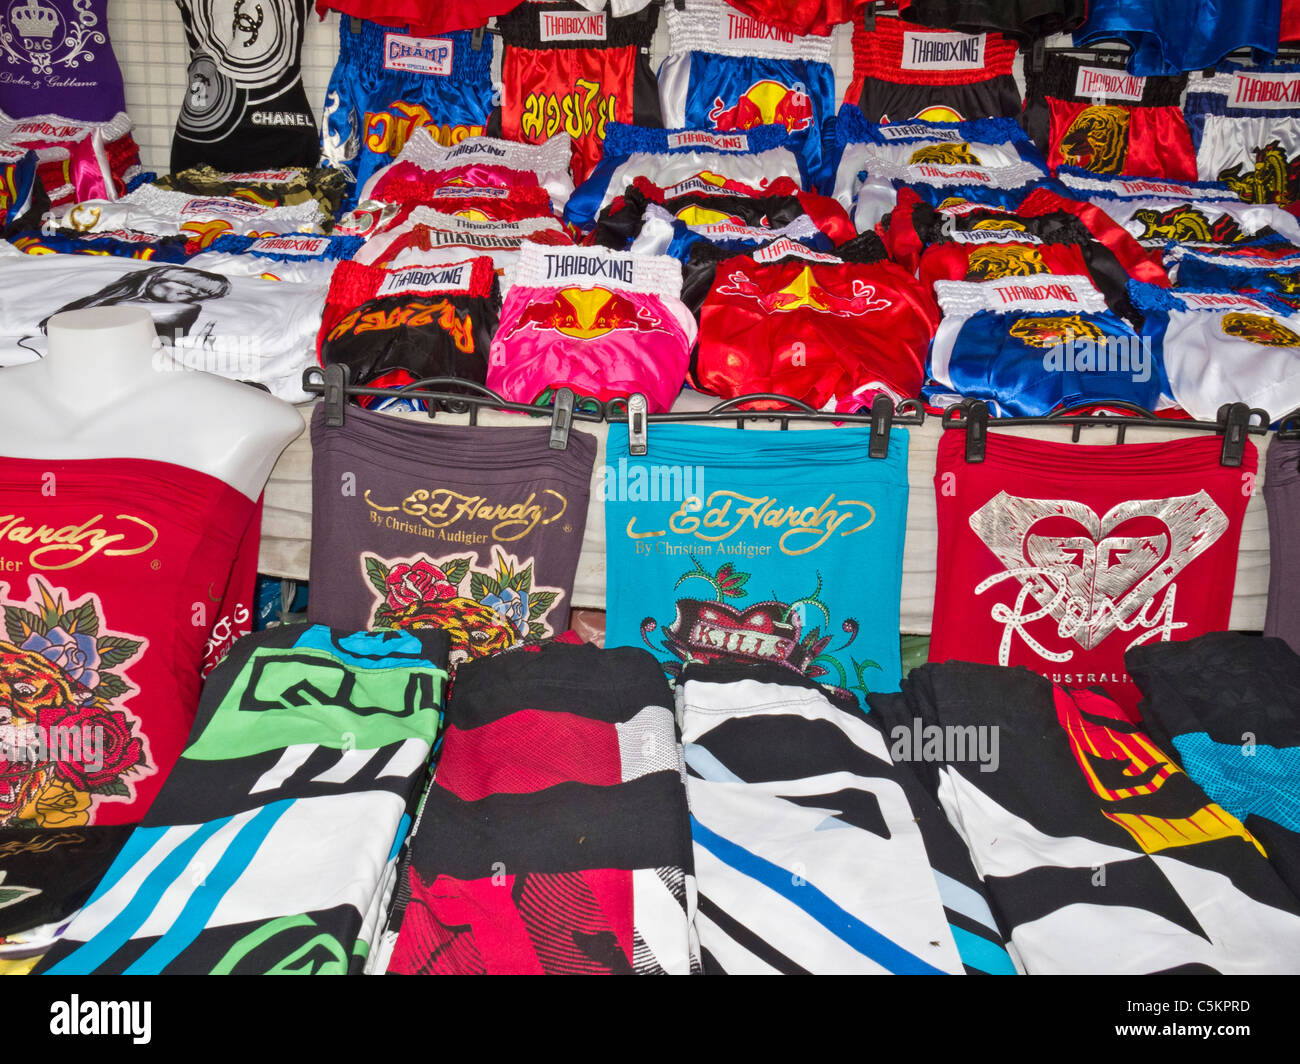 Thai boxing clothing for sale in market Stock Photo